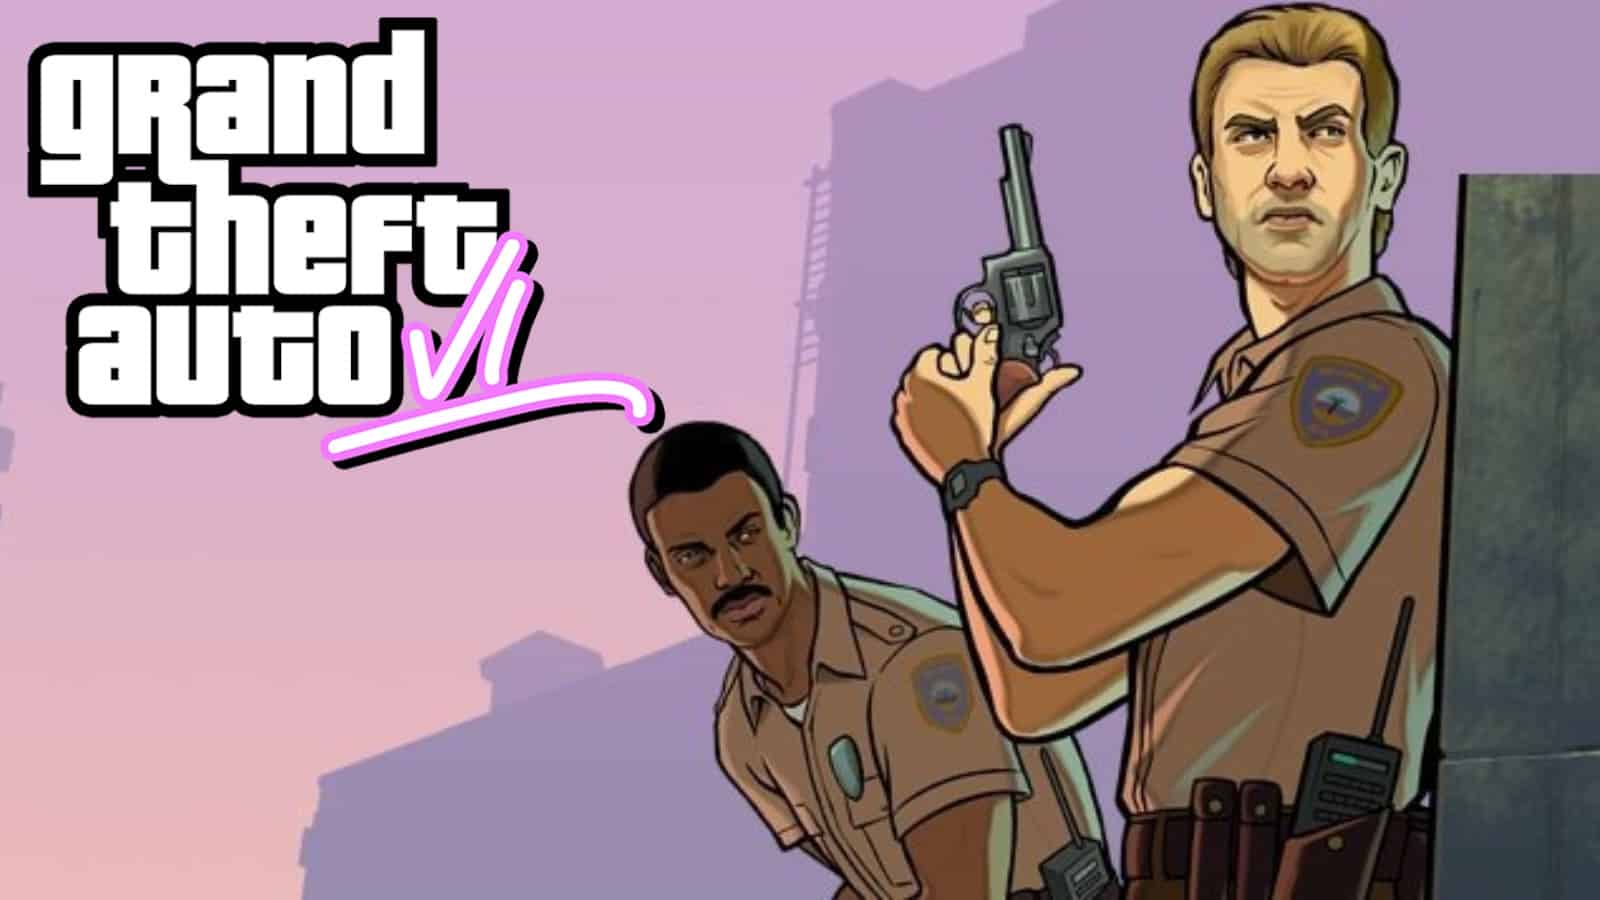 Why Won't Rockstar Release Grand Theft Auto 6?